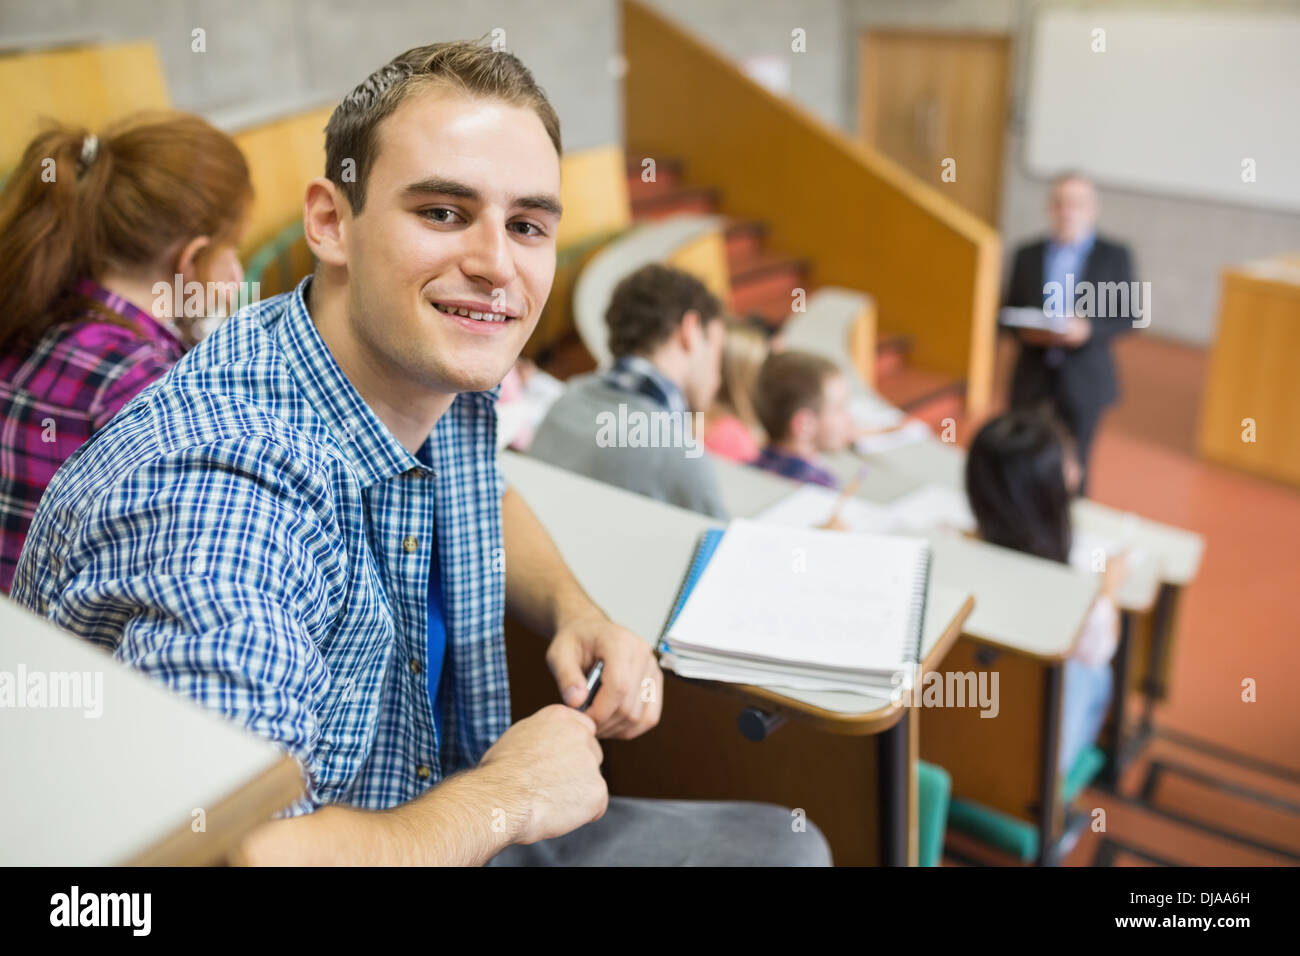 Smiling male with students and teacher at lecture hall Stock Photo